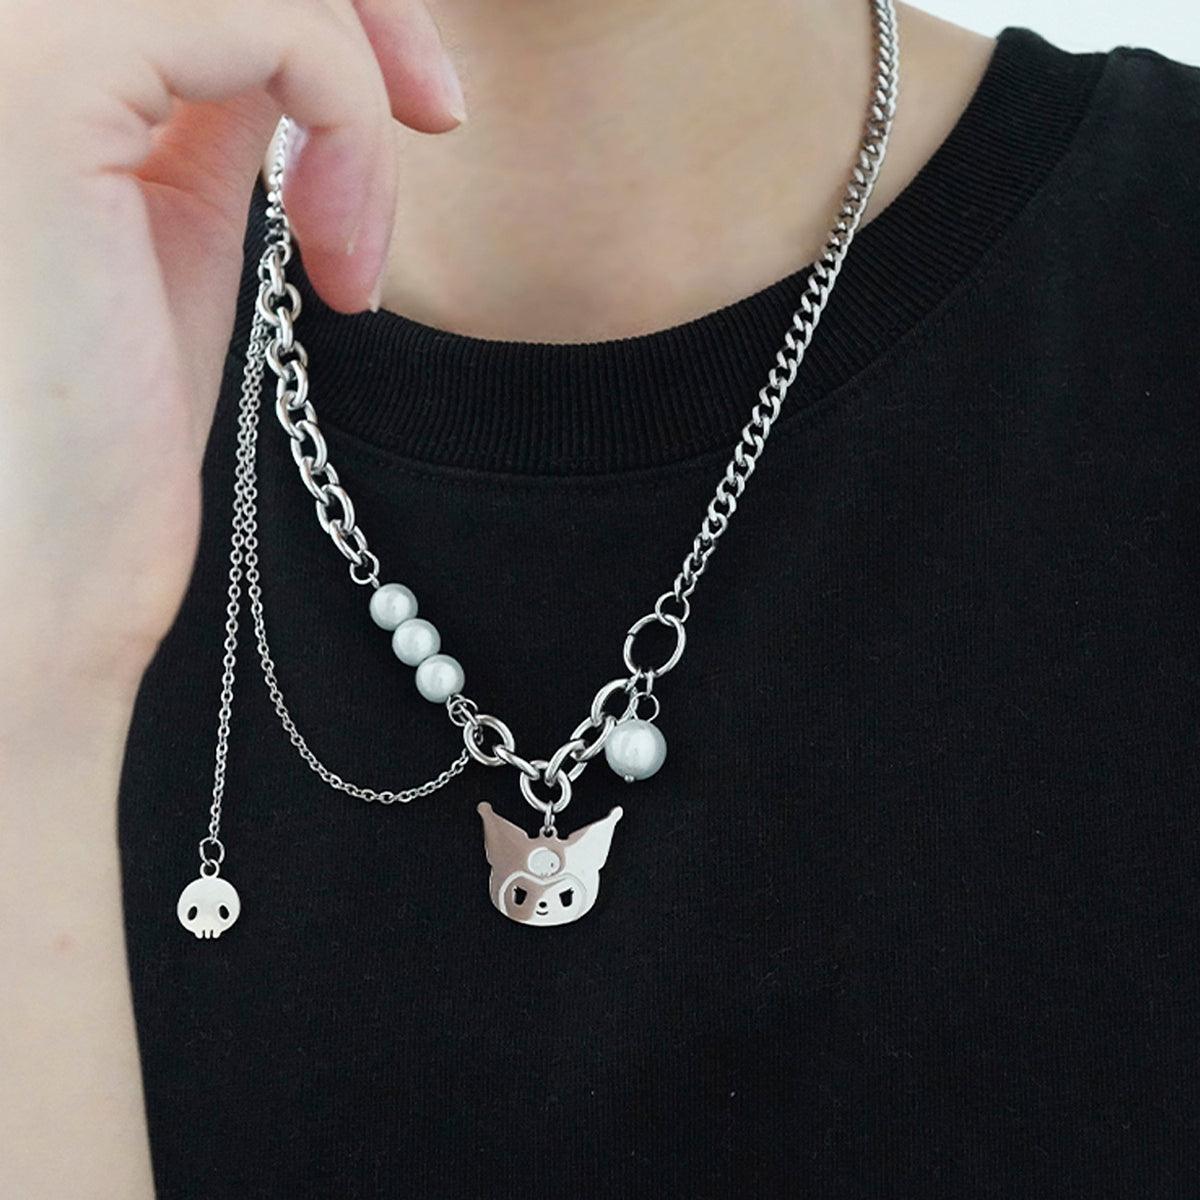 Grunge Kuromi Chain Necklace - Aesthetic Clothes Shop